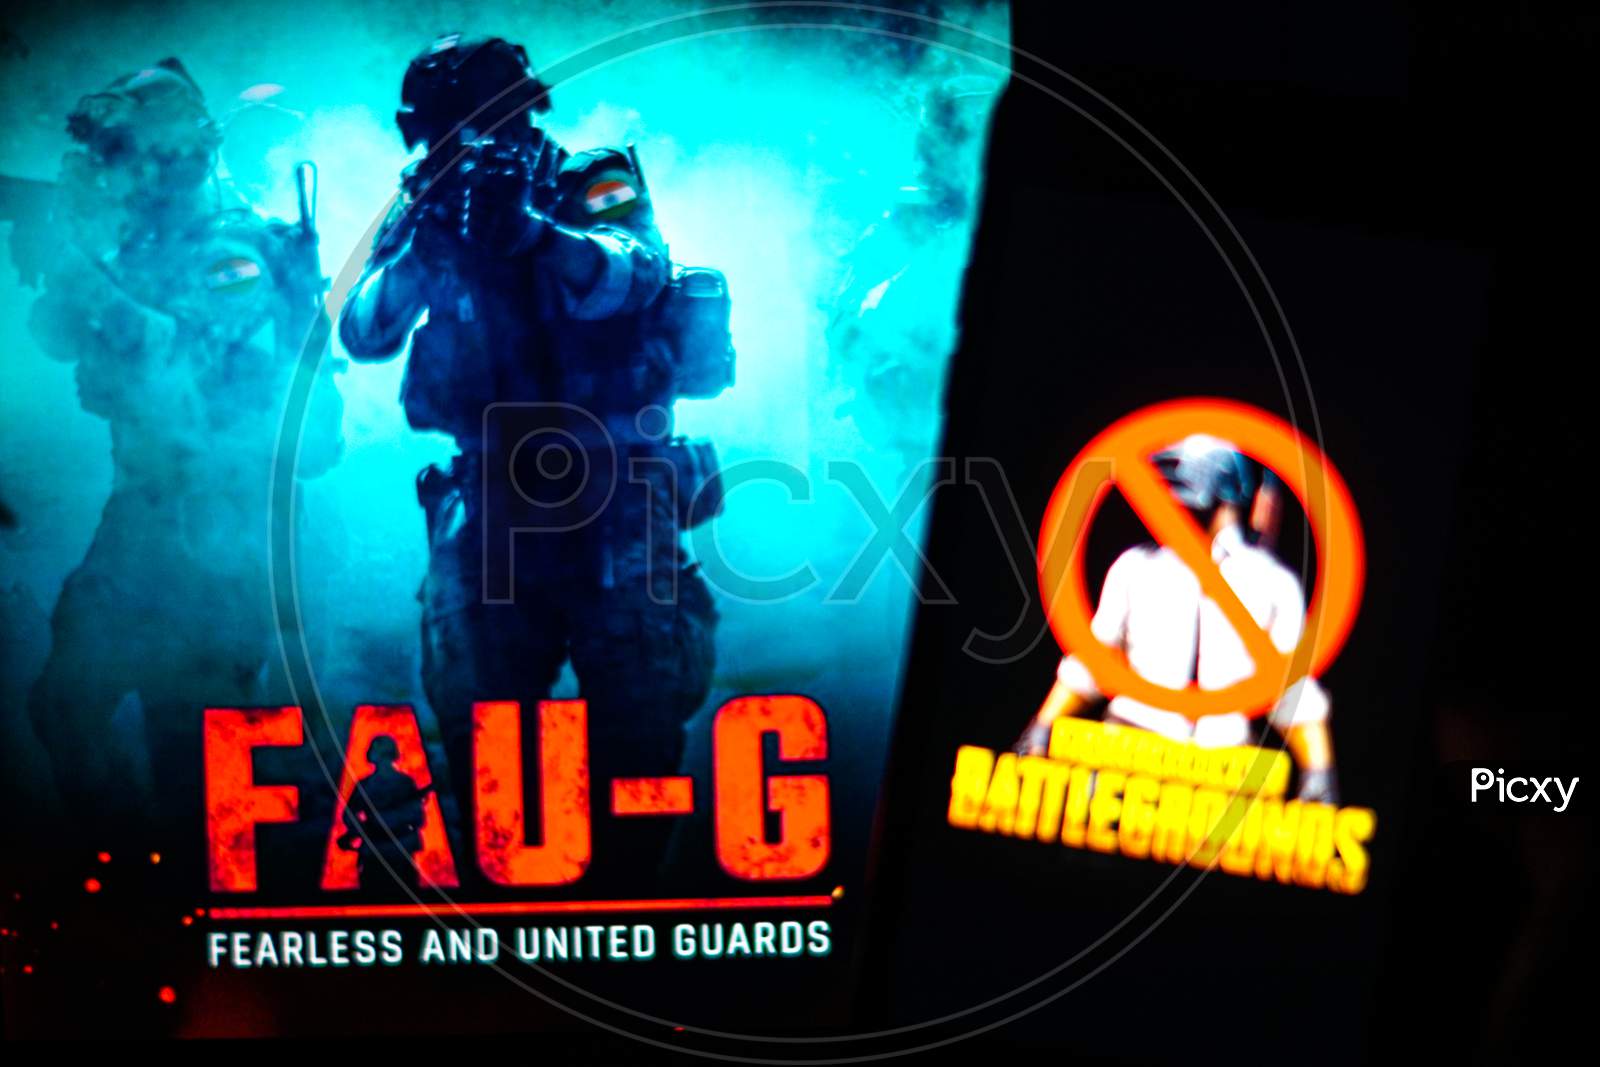 Selective Focus on FAUG Game with Banned PUBG on Mobilephone or Smartphone Screen Game in the Foreground